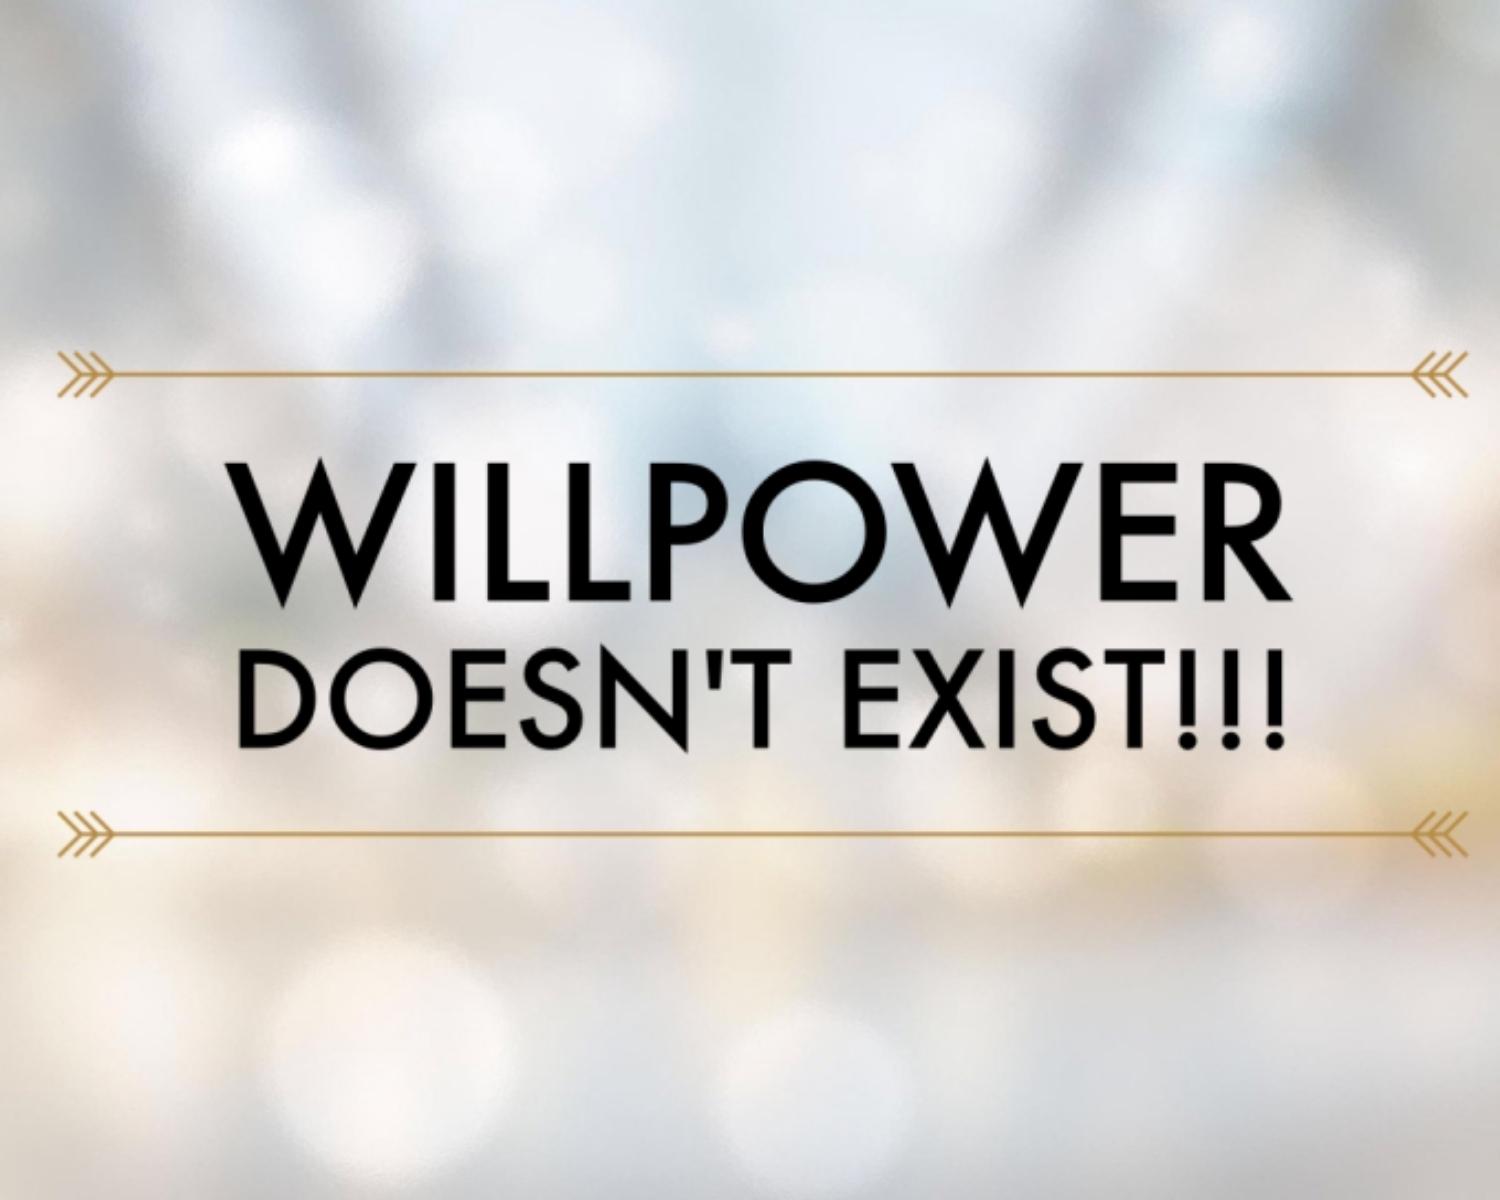 Relying on Willpower